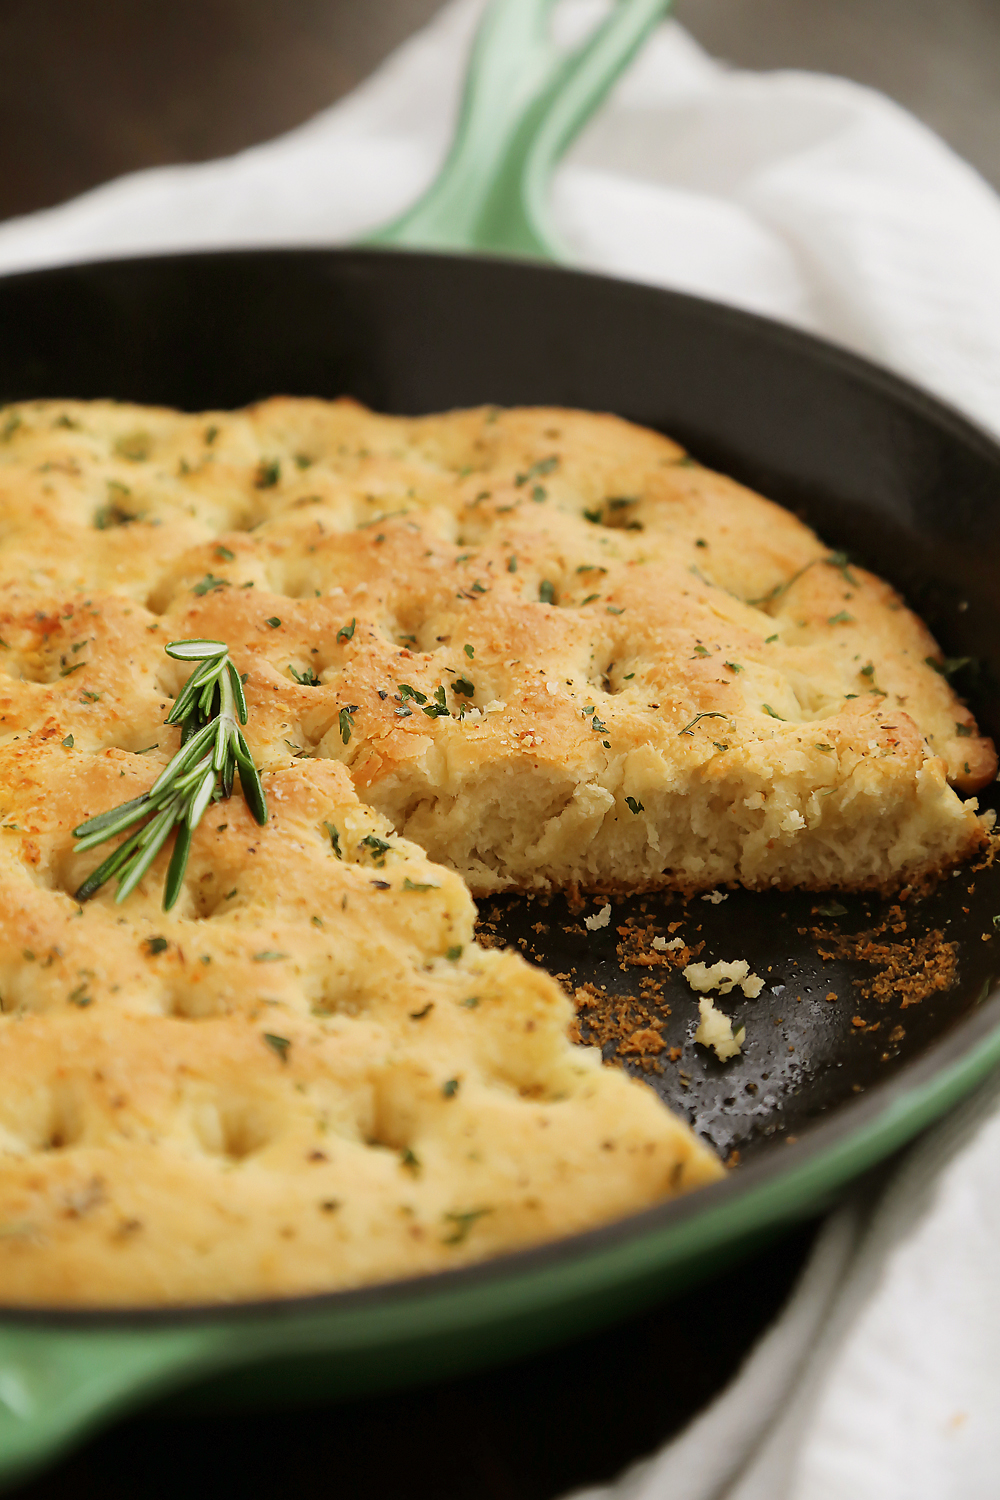 One-Hour Skillet Garlic Parmesan Focaccia - So soft and fluffy! This bread is the perfect side for hearty vegetable dishes, soups, stews and saucy roasts. Thecomfortofcooking.com